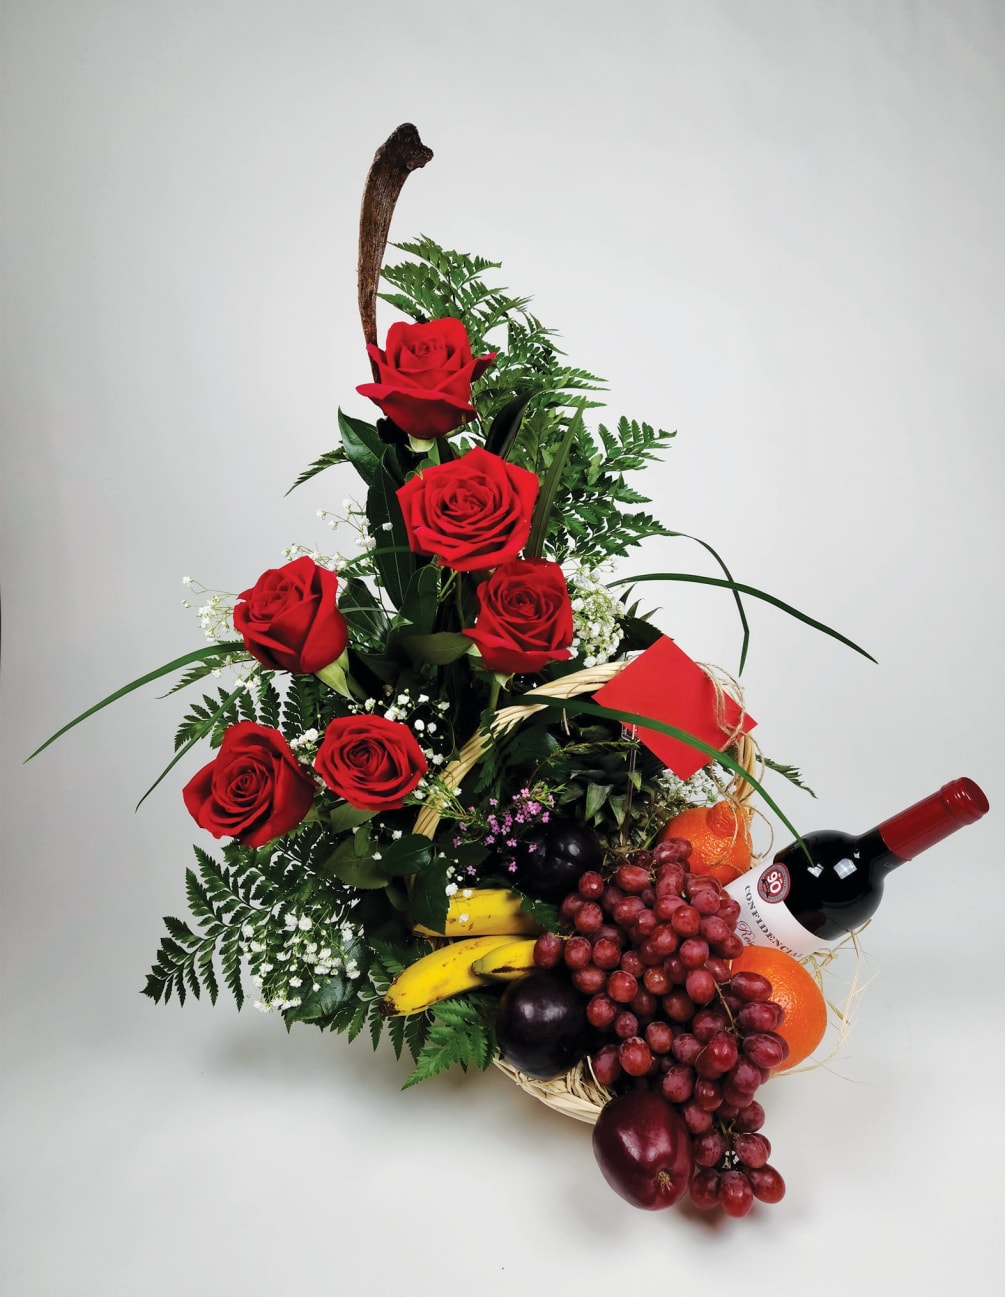 Beautiful basket of six roses, playing fruits, (grapes, bananas, oranges, plums) and